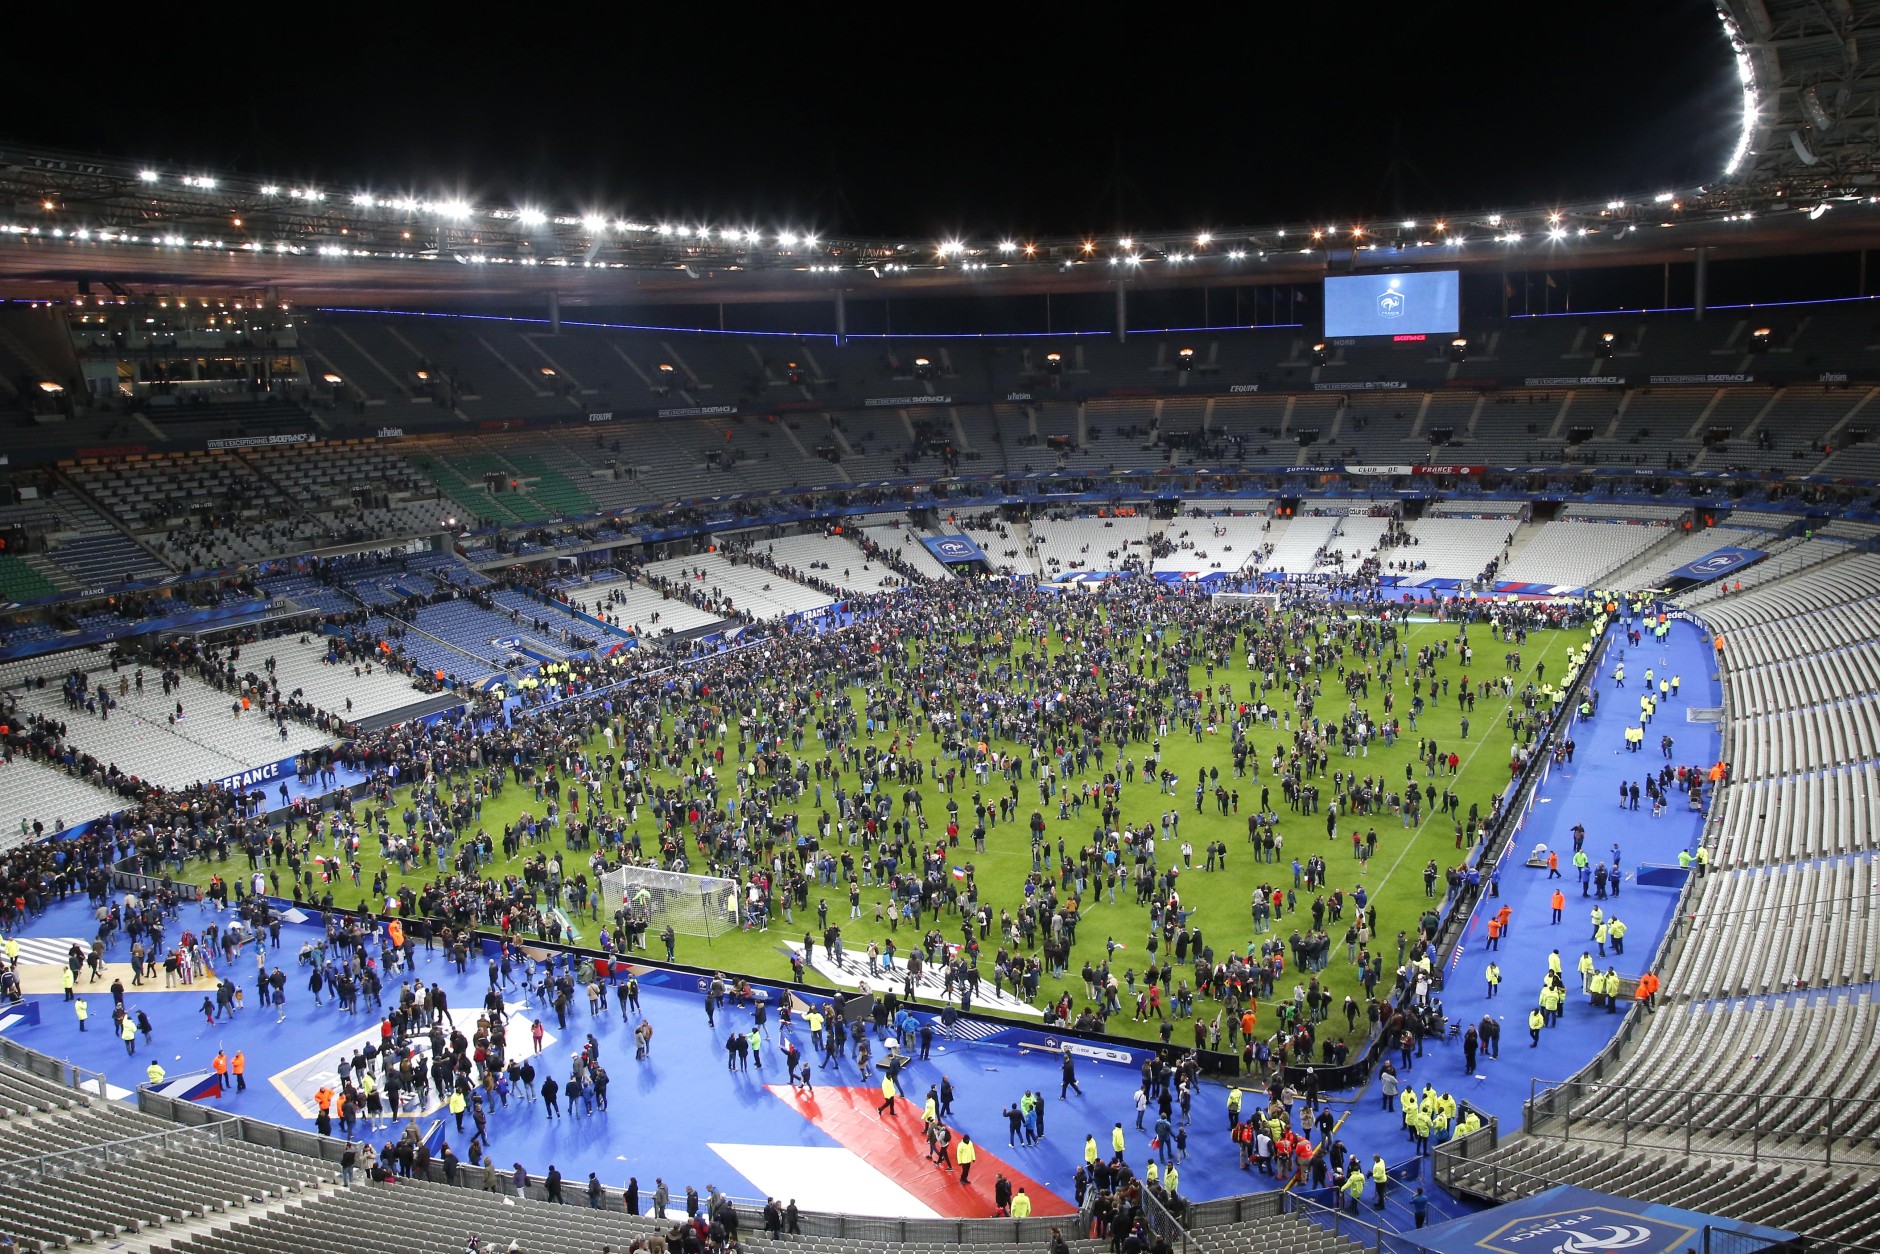 Spectators invade the pitch of the Stade de France stadium after the international friendly soccer France against Germany, Friday, Nov. 13, 2015 in Saint Denis, outside Paris. At least 35 people were killed in shootings and explosions around Paris, many of them in a popular theater where patrons were taken hostage, police and medical officials said Friday.  Two explosions were heard outside the Stade de France stadium. (AP Photo/Michel Euler)